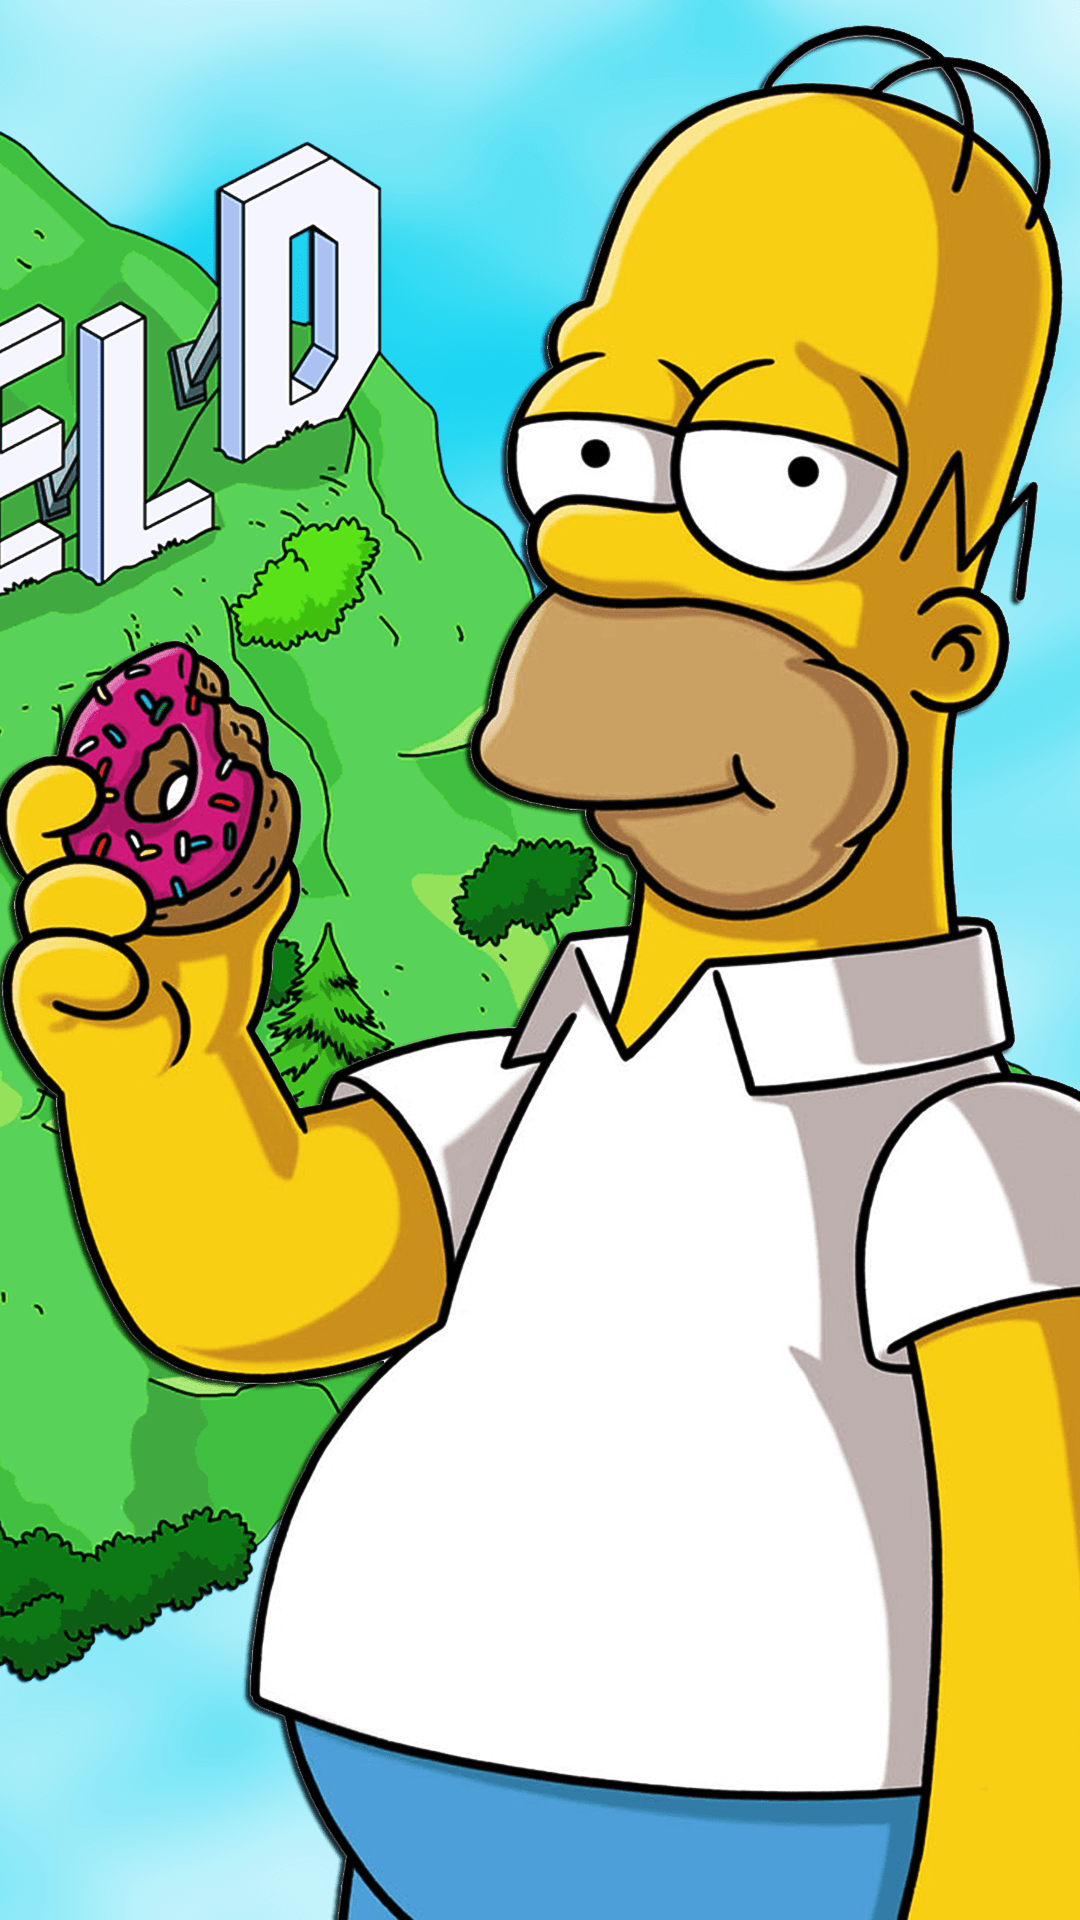 Homer Simpson eating a donut in front of the Hollywood sign. - Homer Simpson